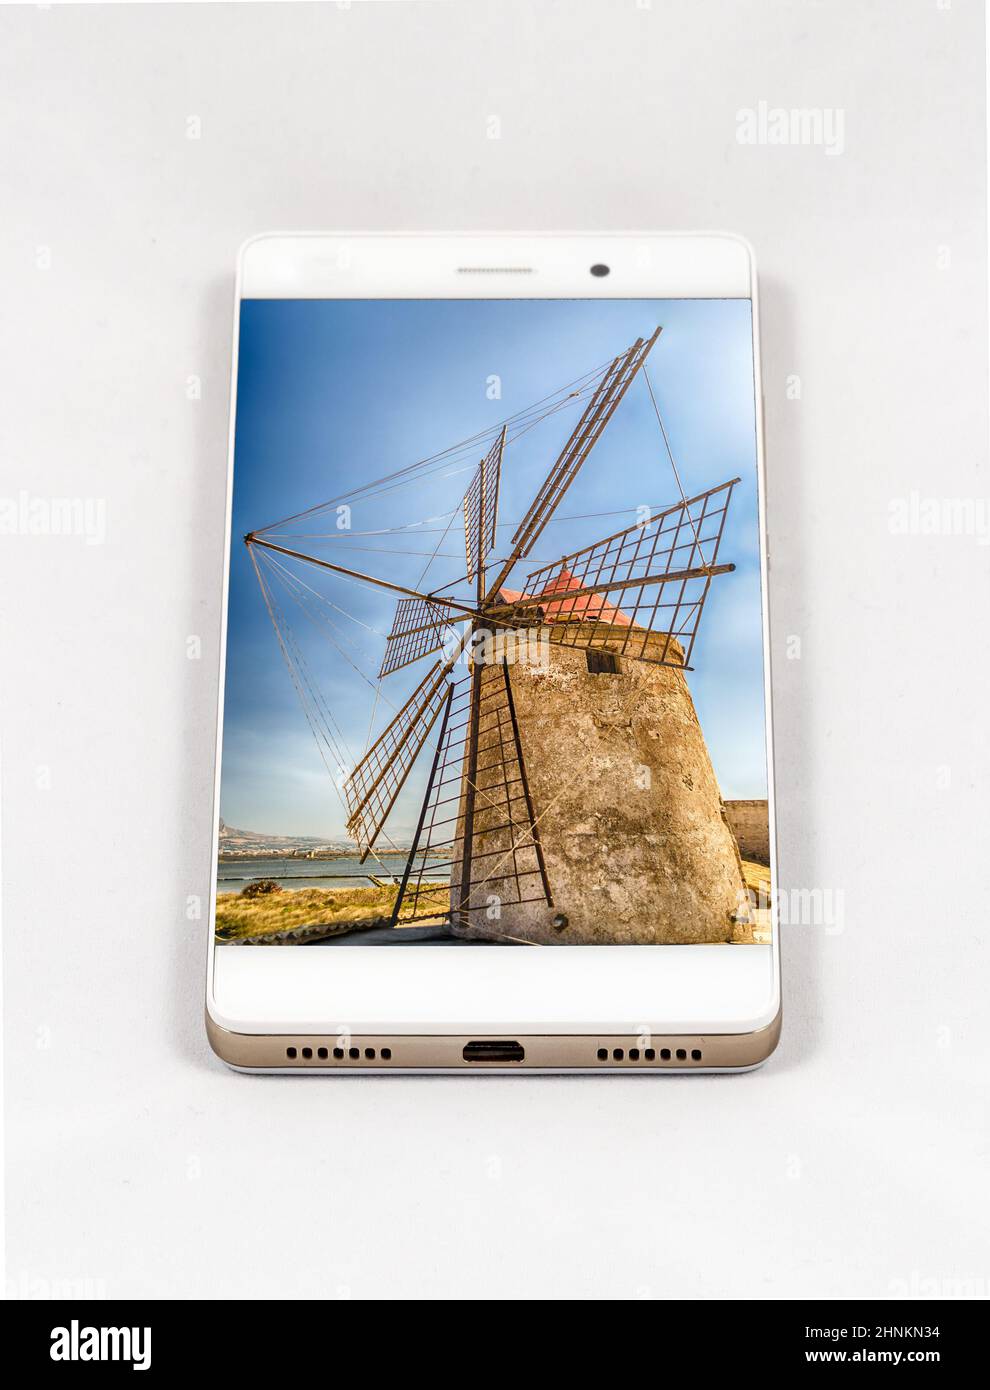 Modern smartphone displaying full screen picture of old windmill, Italy Stock Photo